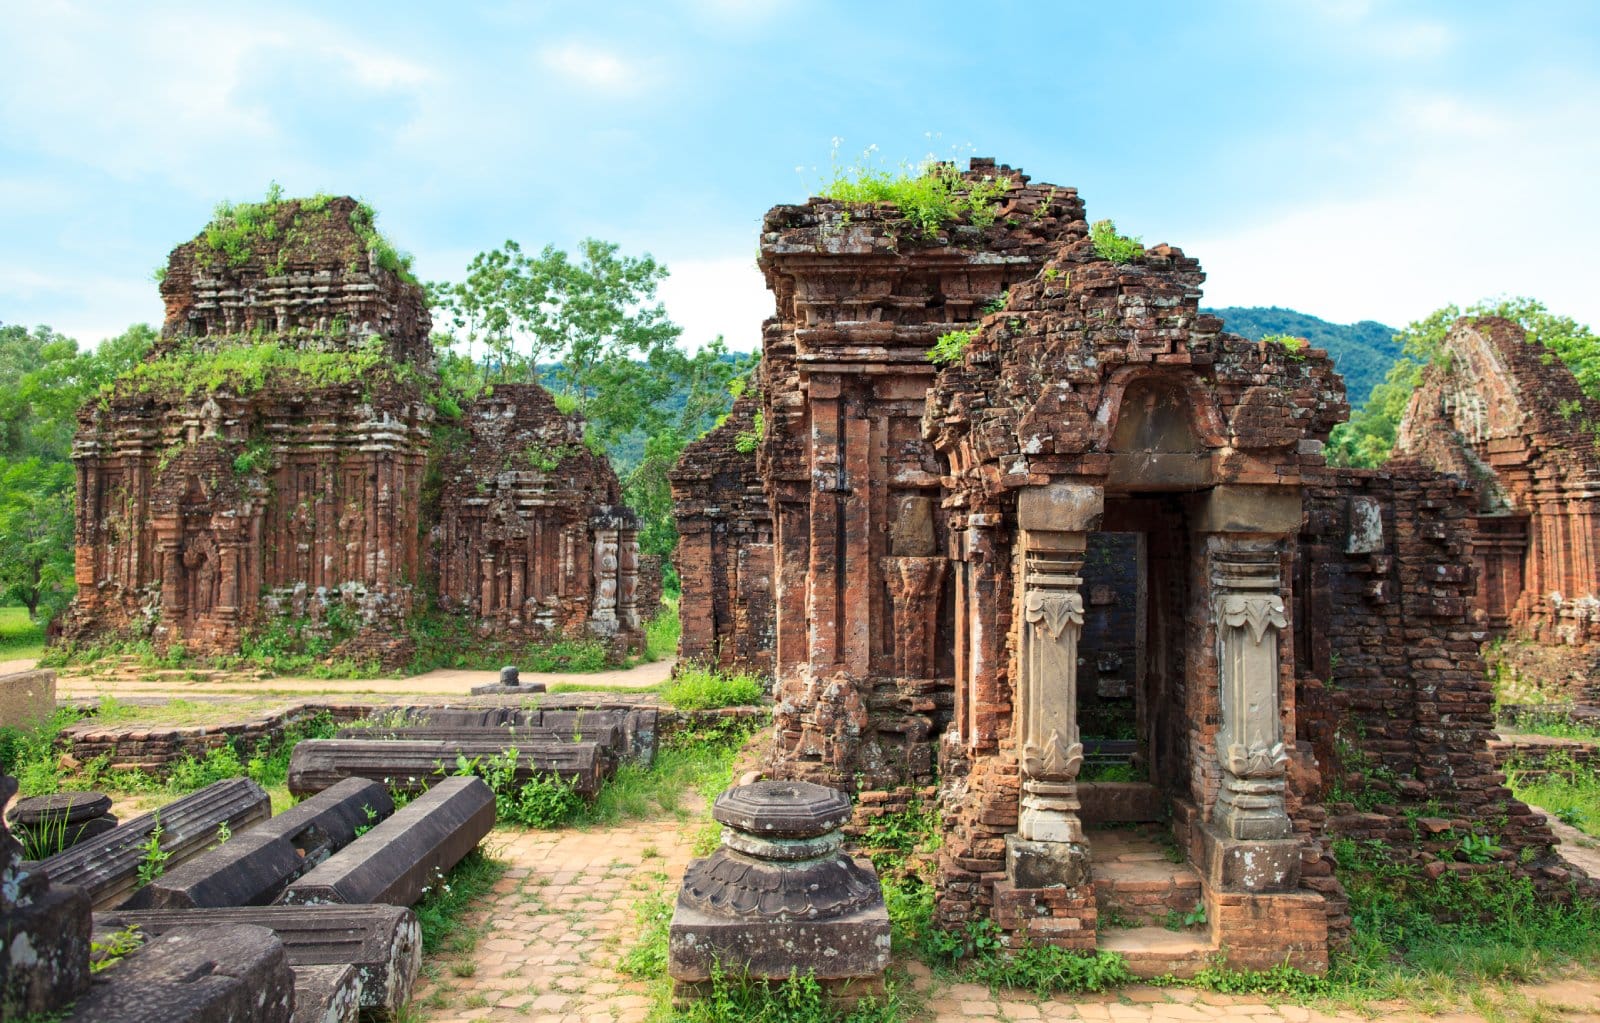 <p class="wp-caption-text">Image Credit: Shutterstock / upslim</p>  <p><span>My Son Sanctuary, a UNESCO World Heritage site near Hoi An, is an ancient temple complex that was once the spiritual center of the Champa Kingdom. Veterans leading tours here provide not only historical context about the Champa civilization but also recount the sanctuary’s significance during the Vietnam War, including damage sustained from bombing. The juxtaposition of ancient history and recent conflict offers a unique perspective on Vietnam’s layered past.</span></p>